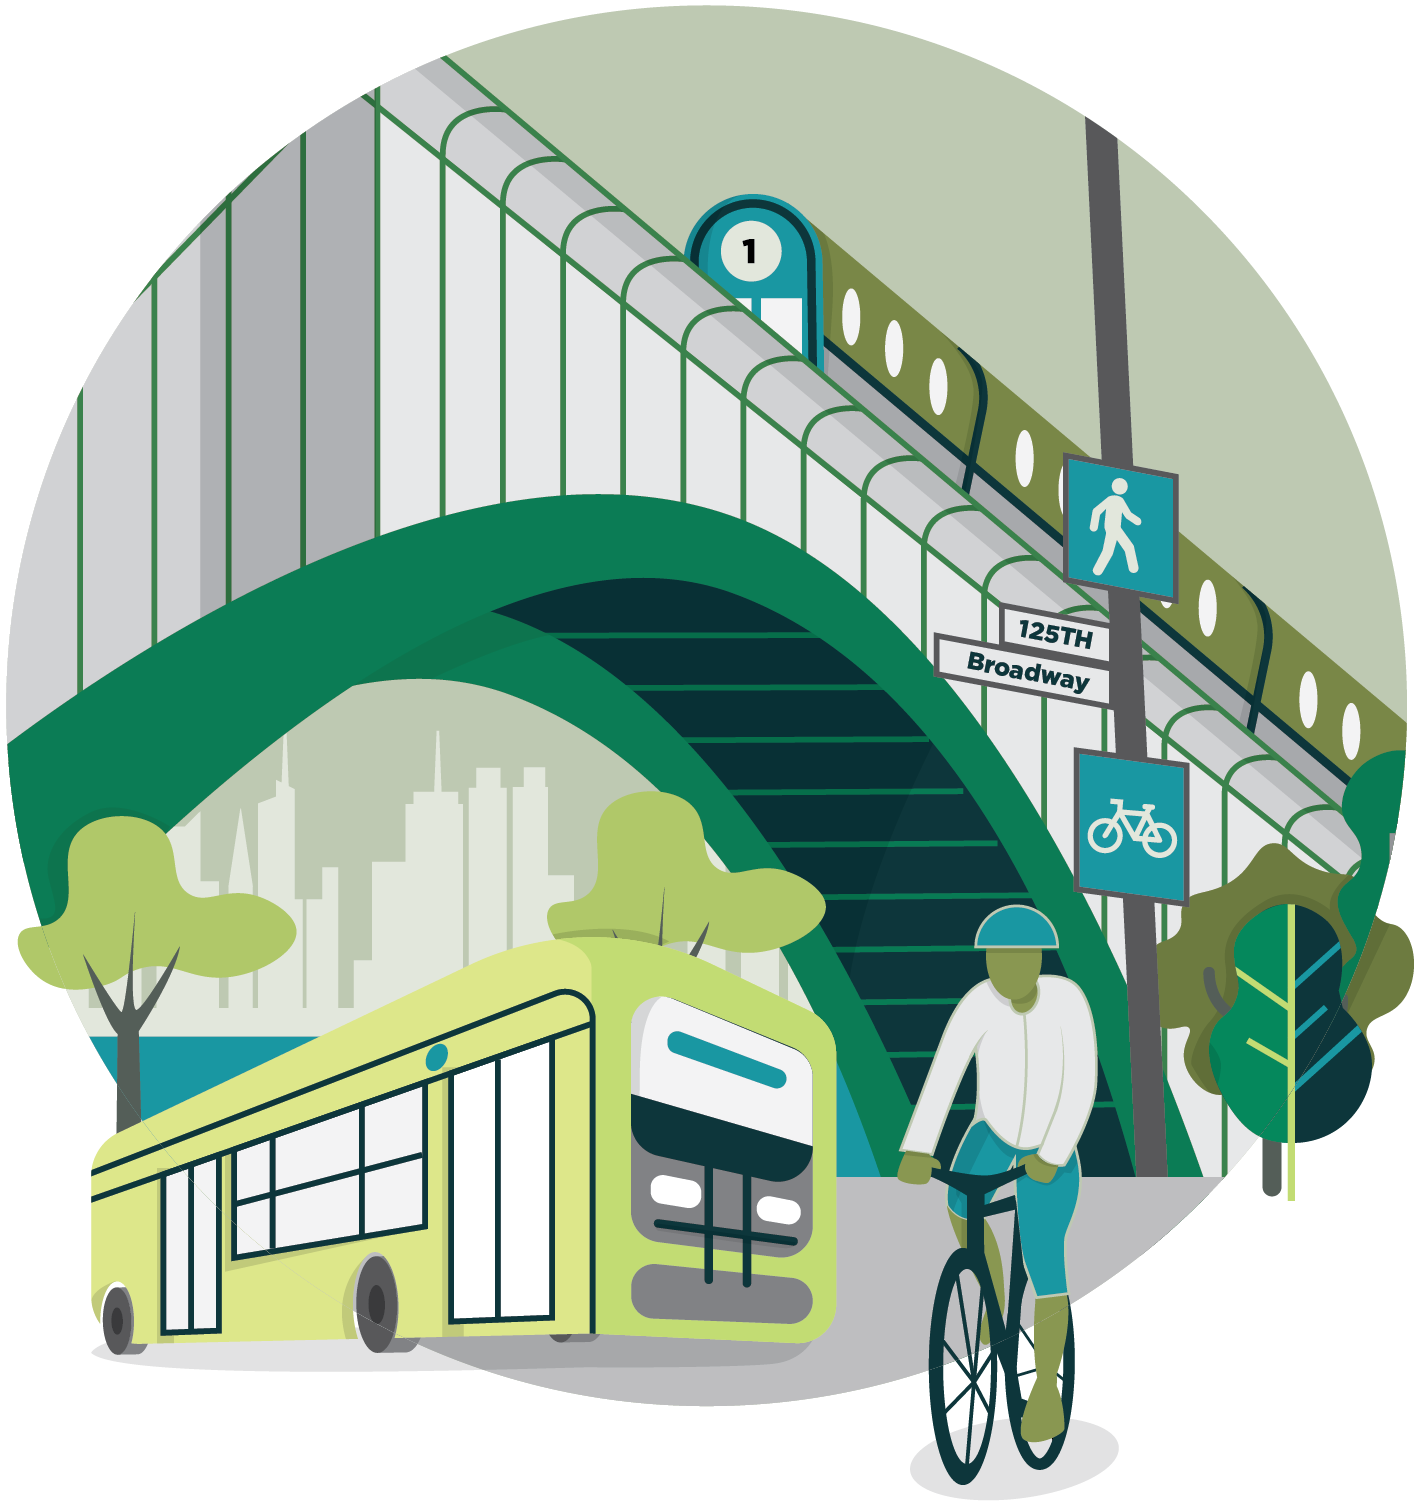 Illustration of an intersection with a bus, a bicycle rider, and the subway overhead to represent transportation in the brand colors of Sustainable Columbia